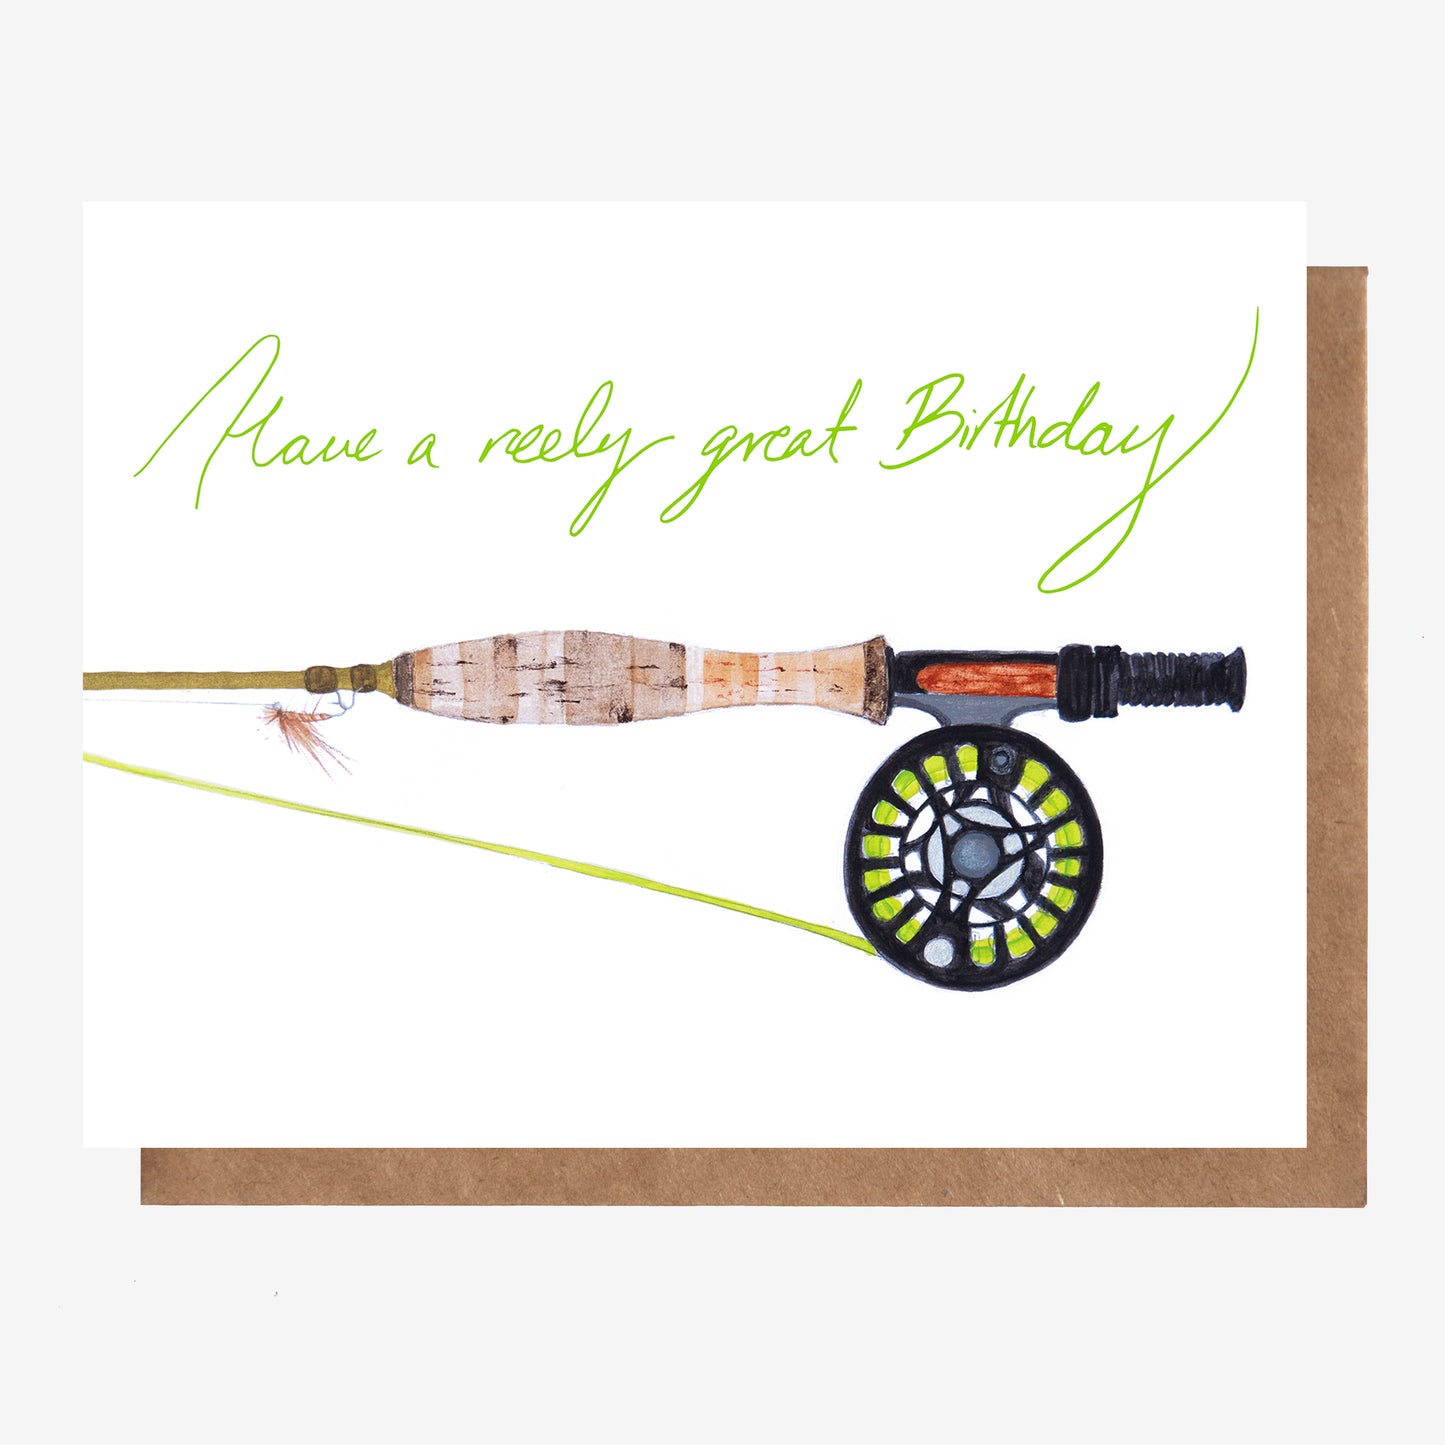 Have a reely great Birthday!  This hand drawn birthday card featuring a fly fishing rod, reel and elk hair caddis fly is perfect for anglers and fishing enthusiasts. Made in Nova Scotia, Canada by Coastal Card Co.